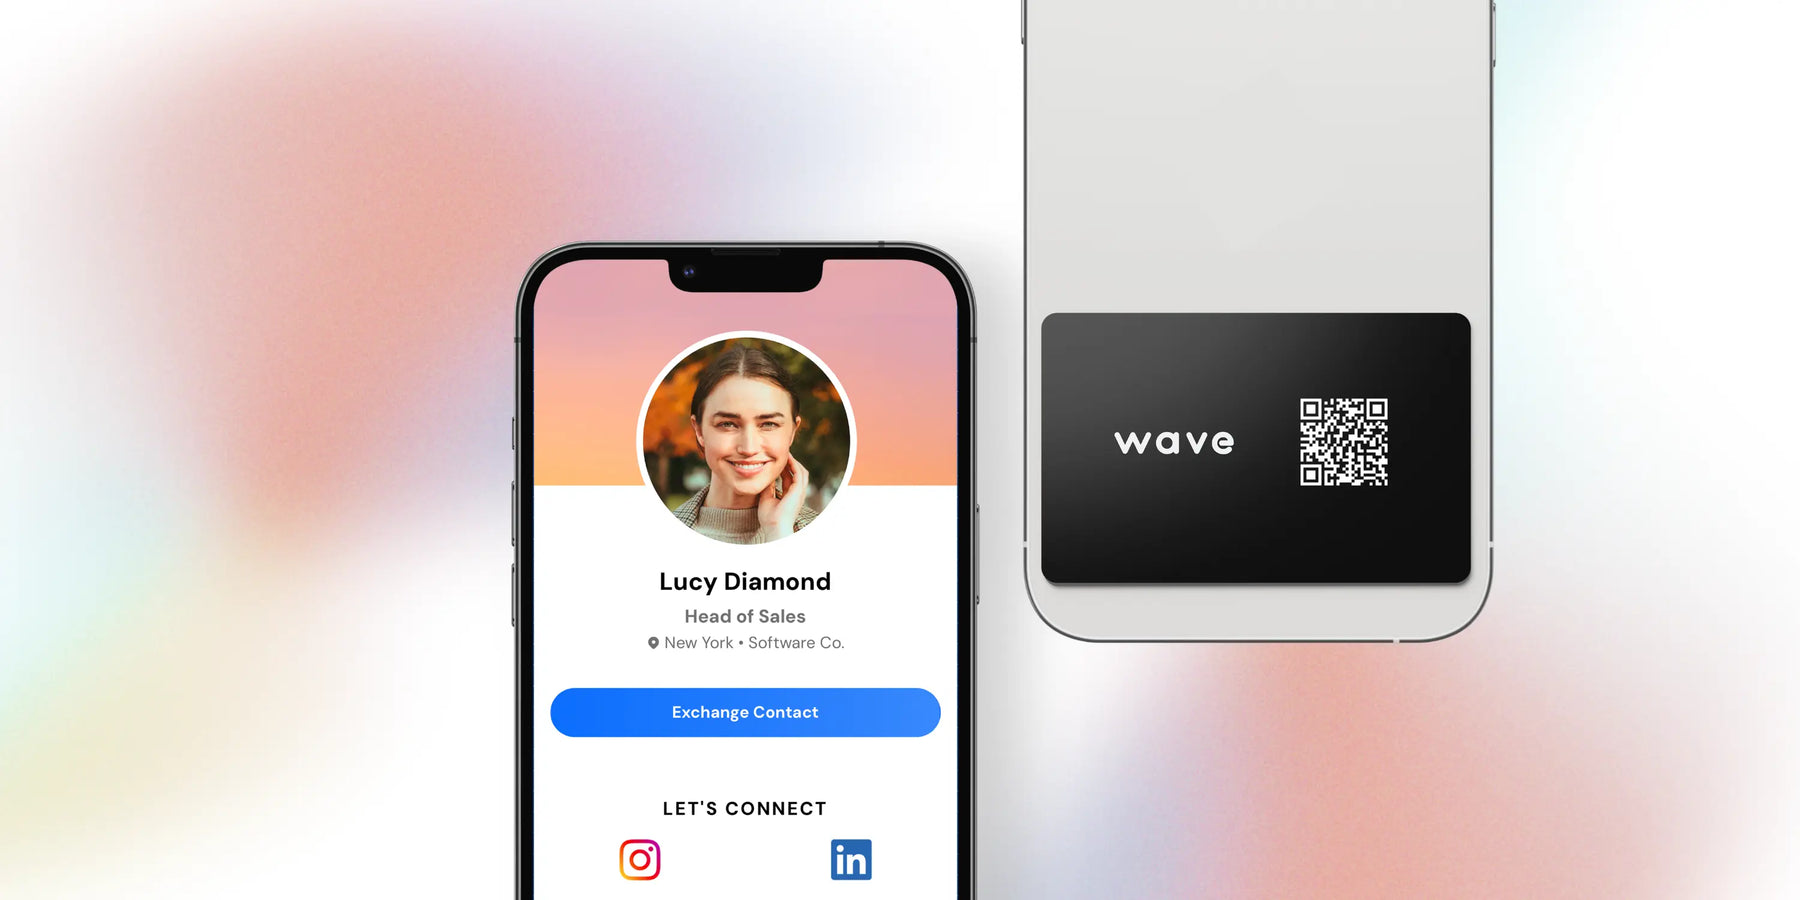 Wave connect digital business card profile and wave phone tap